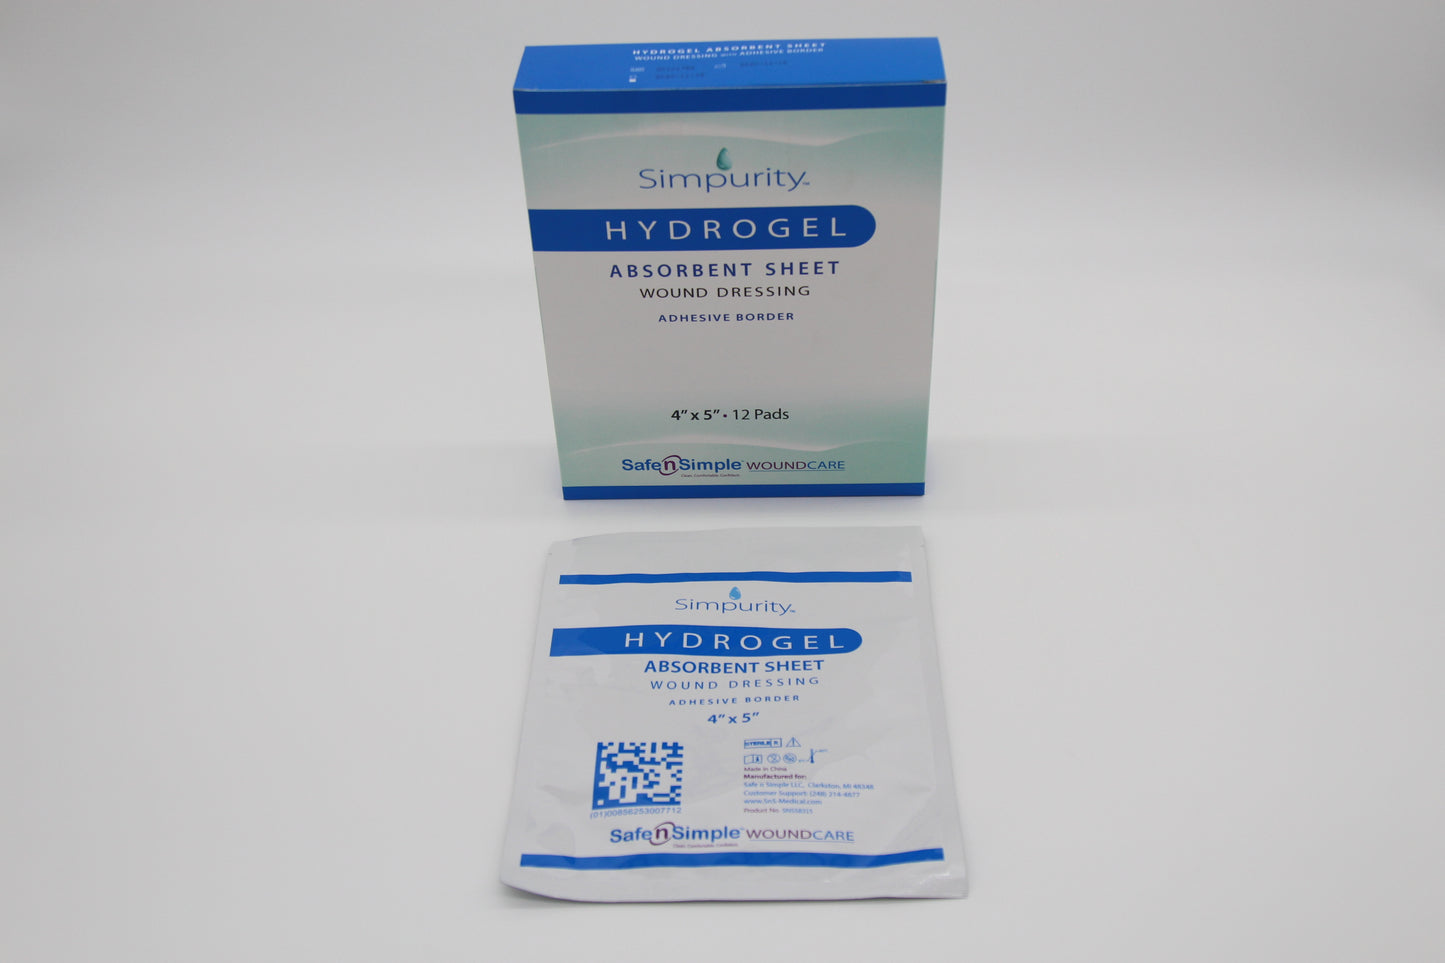 HydroGel Sheets | SNS medical | Wound care dressing | Wound dressing | Advanced Wound Care